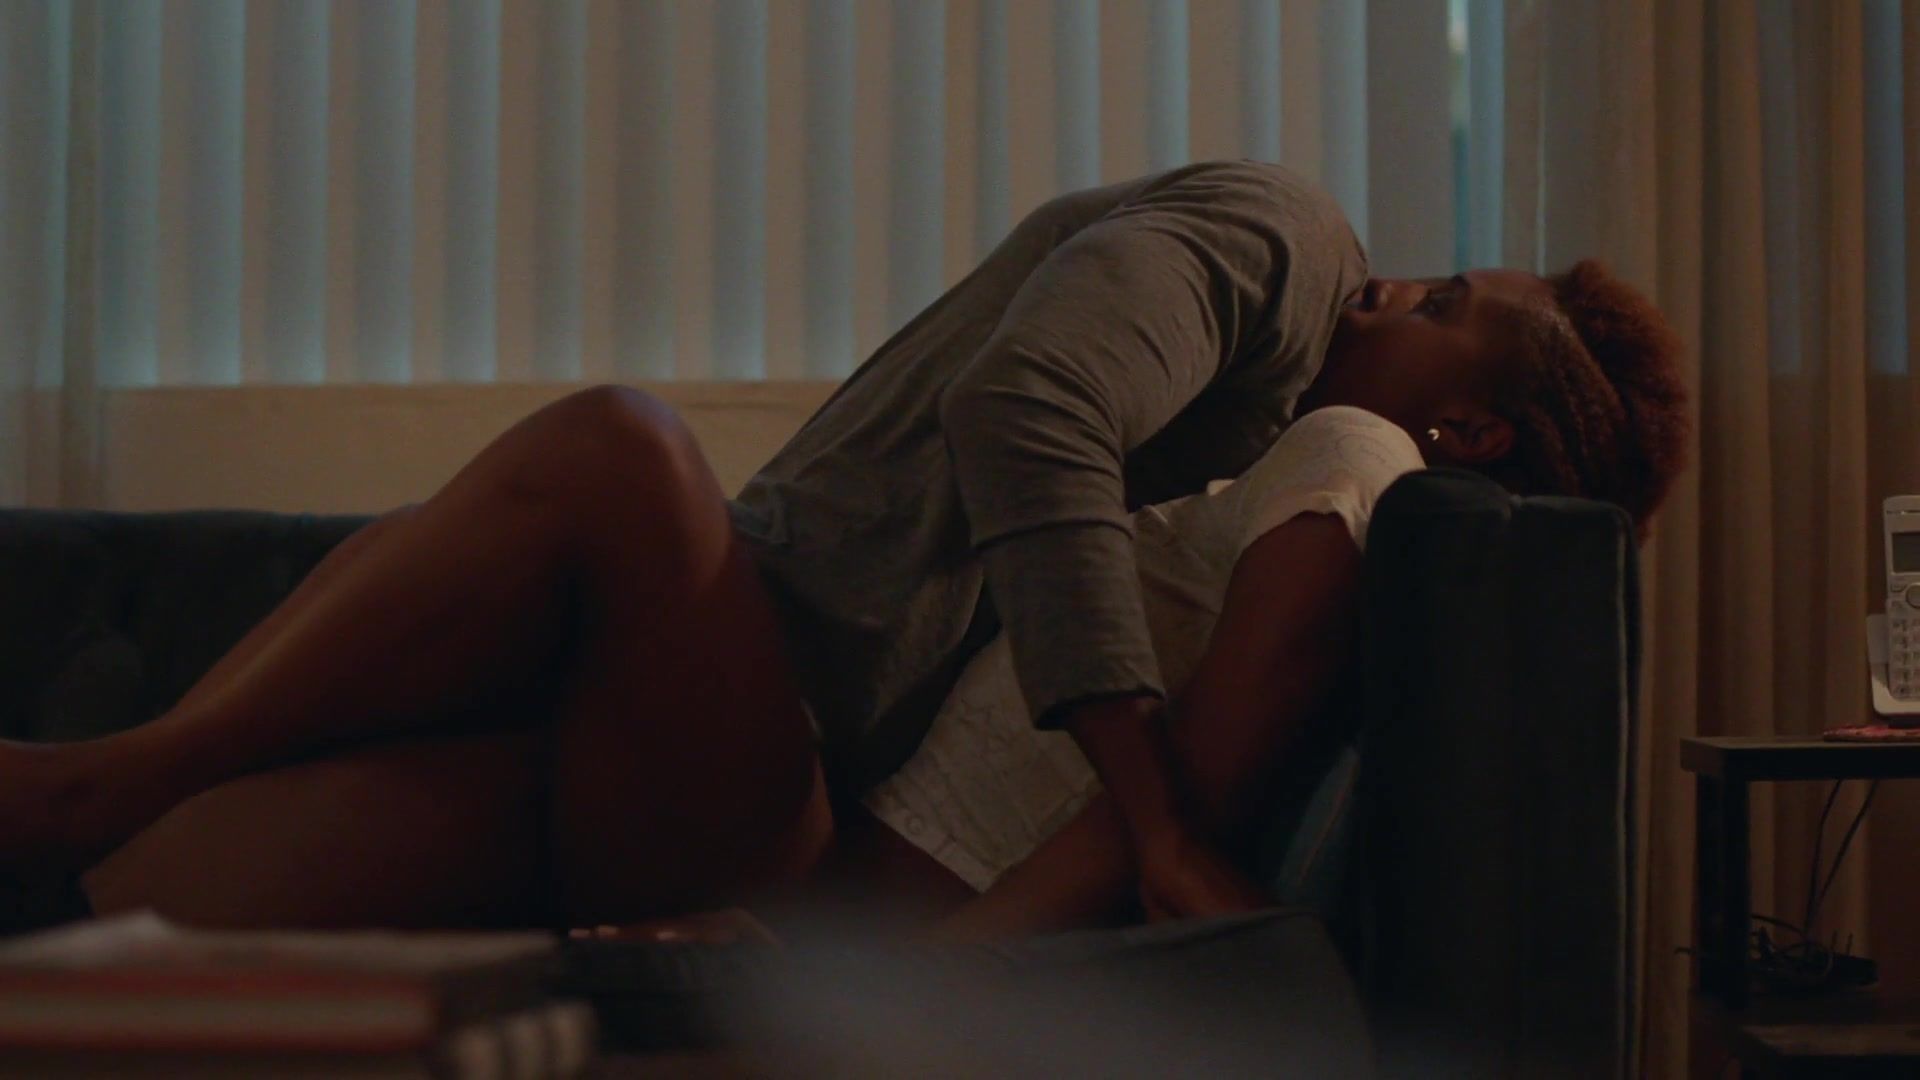 Big Tits Domnique Perry nude, Issa Rae Nude - Insecure s02e01 (2017) Big Tit Moms - 1